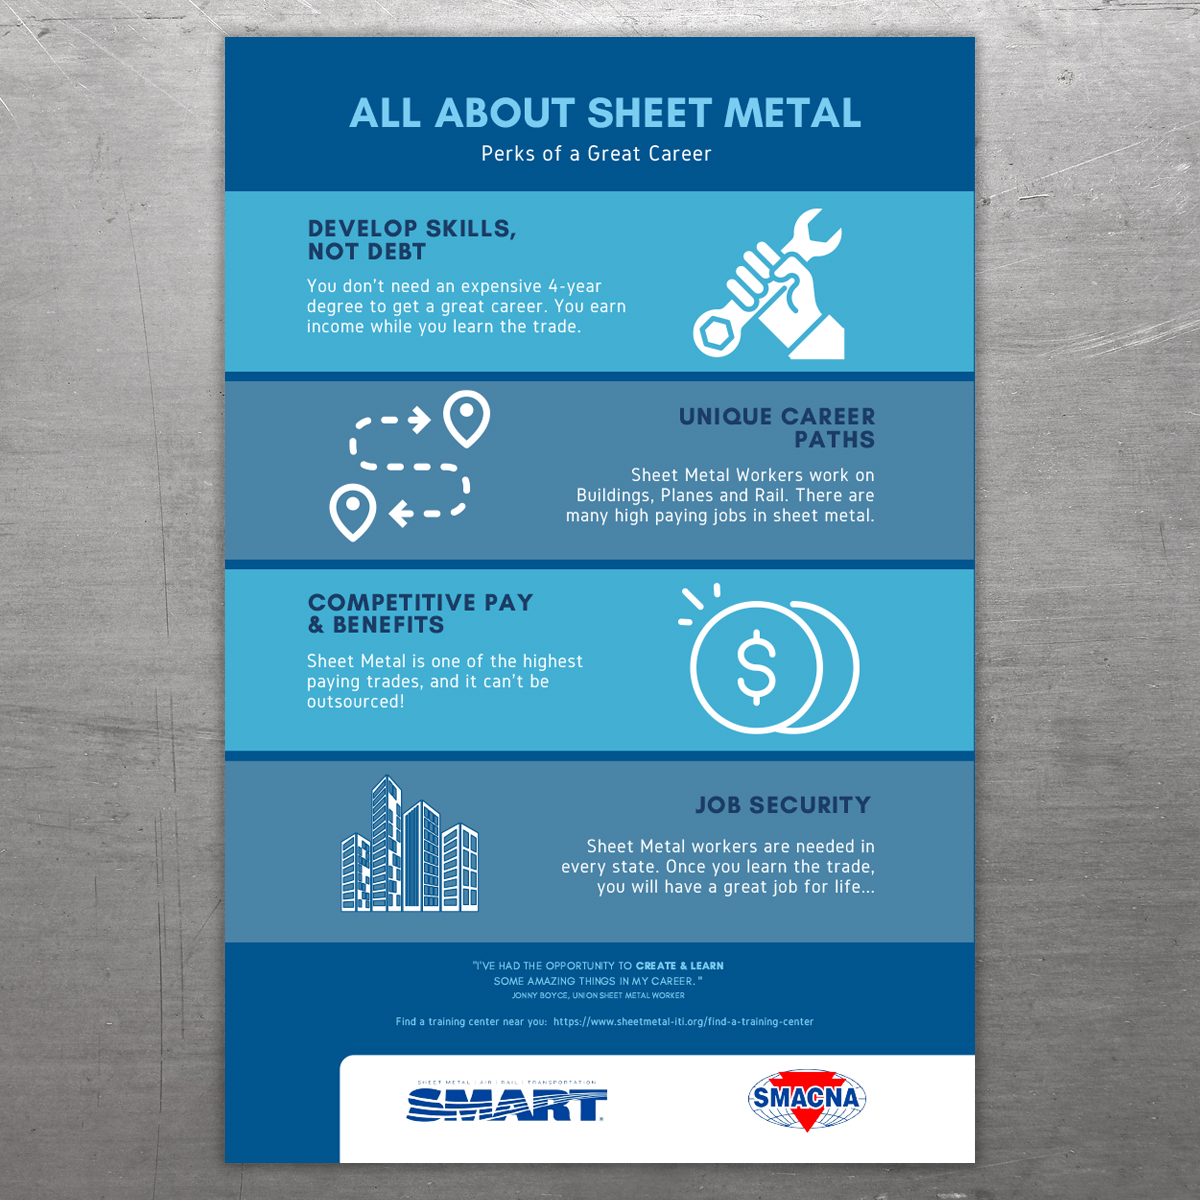 Poster - All About Sheet Metal image